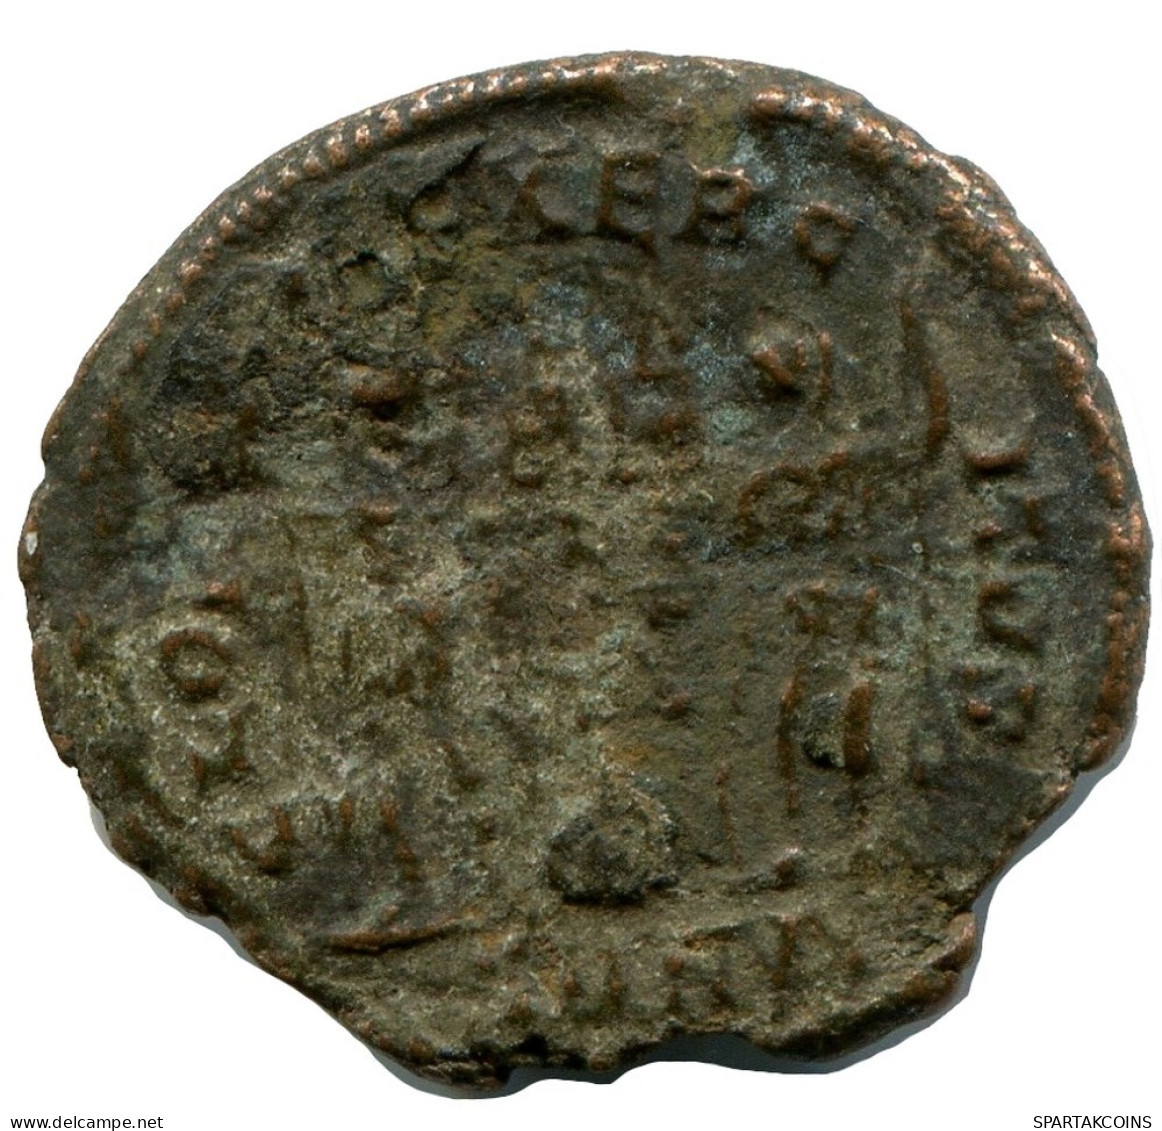 CONSTANTINE I MINTED IN ANTIOCH FOUND IN IHNASYAH HOARD EGYPT #ANC10640.14.U.A - The Christian Empire (307 AD Tot 363 AD)